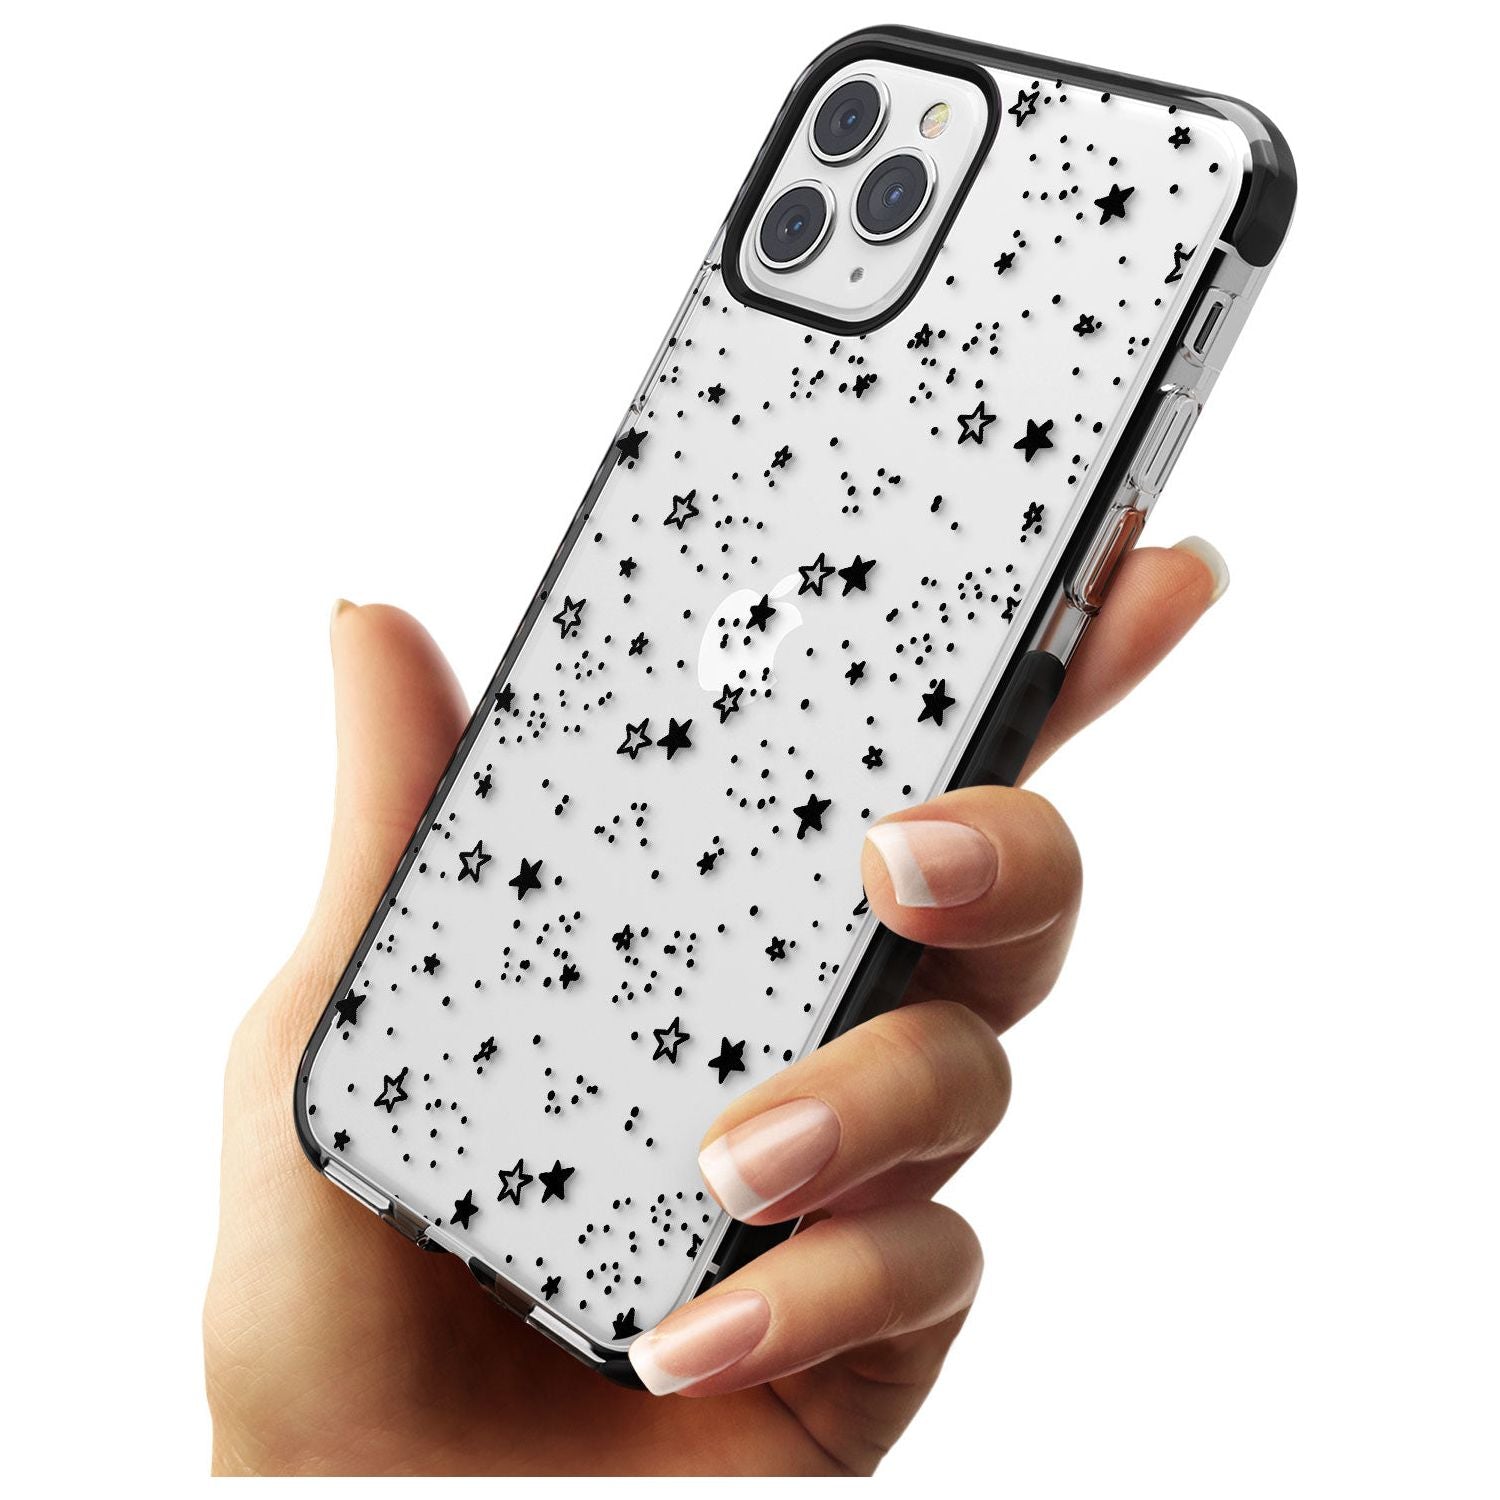 Solid Stars Black Impact Phone Case for iPhone 11 Pro Max